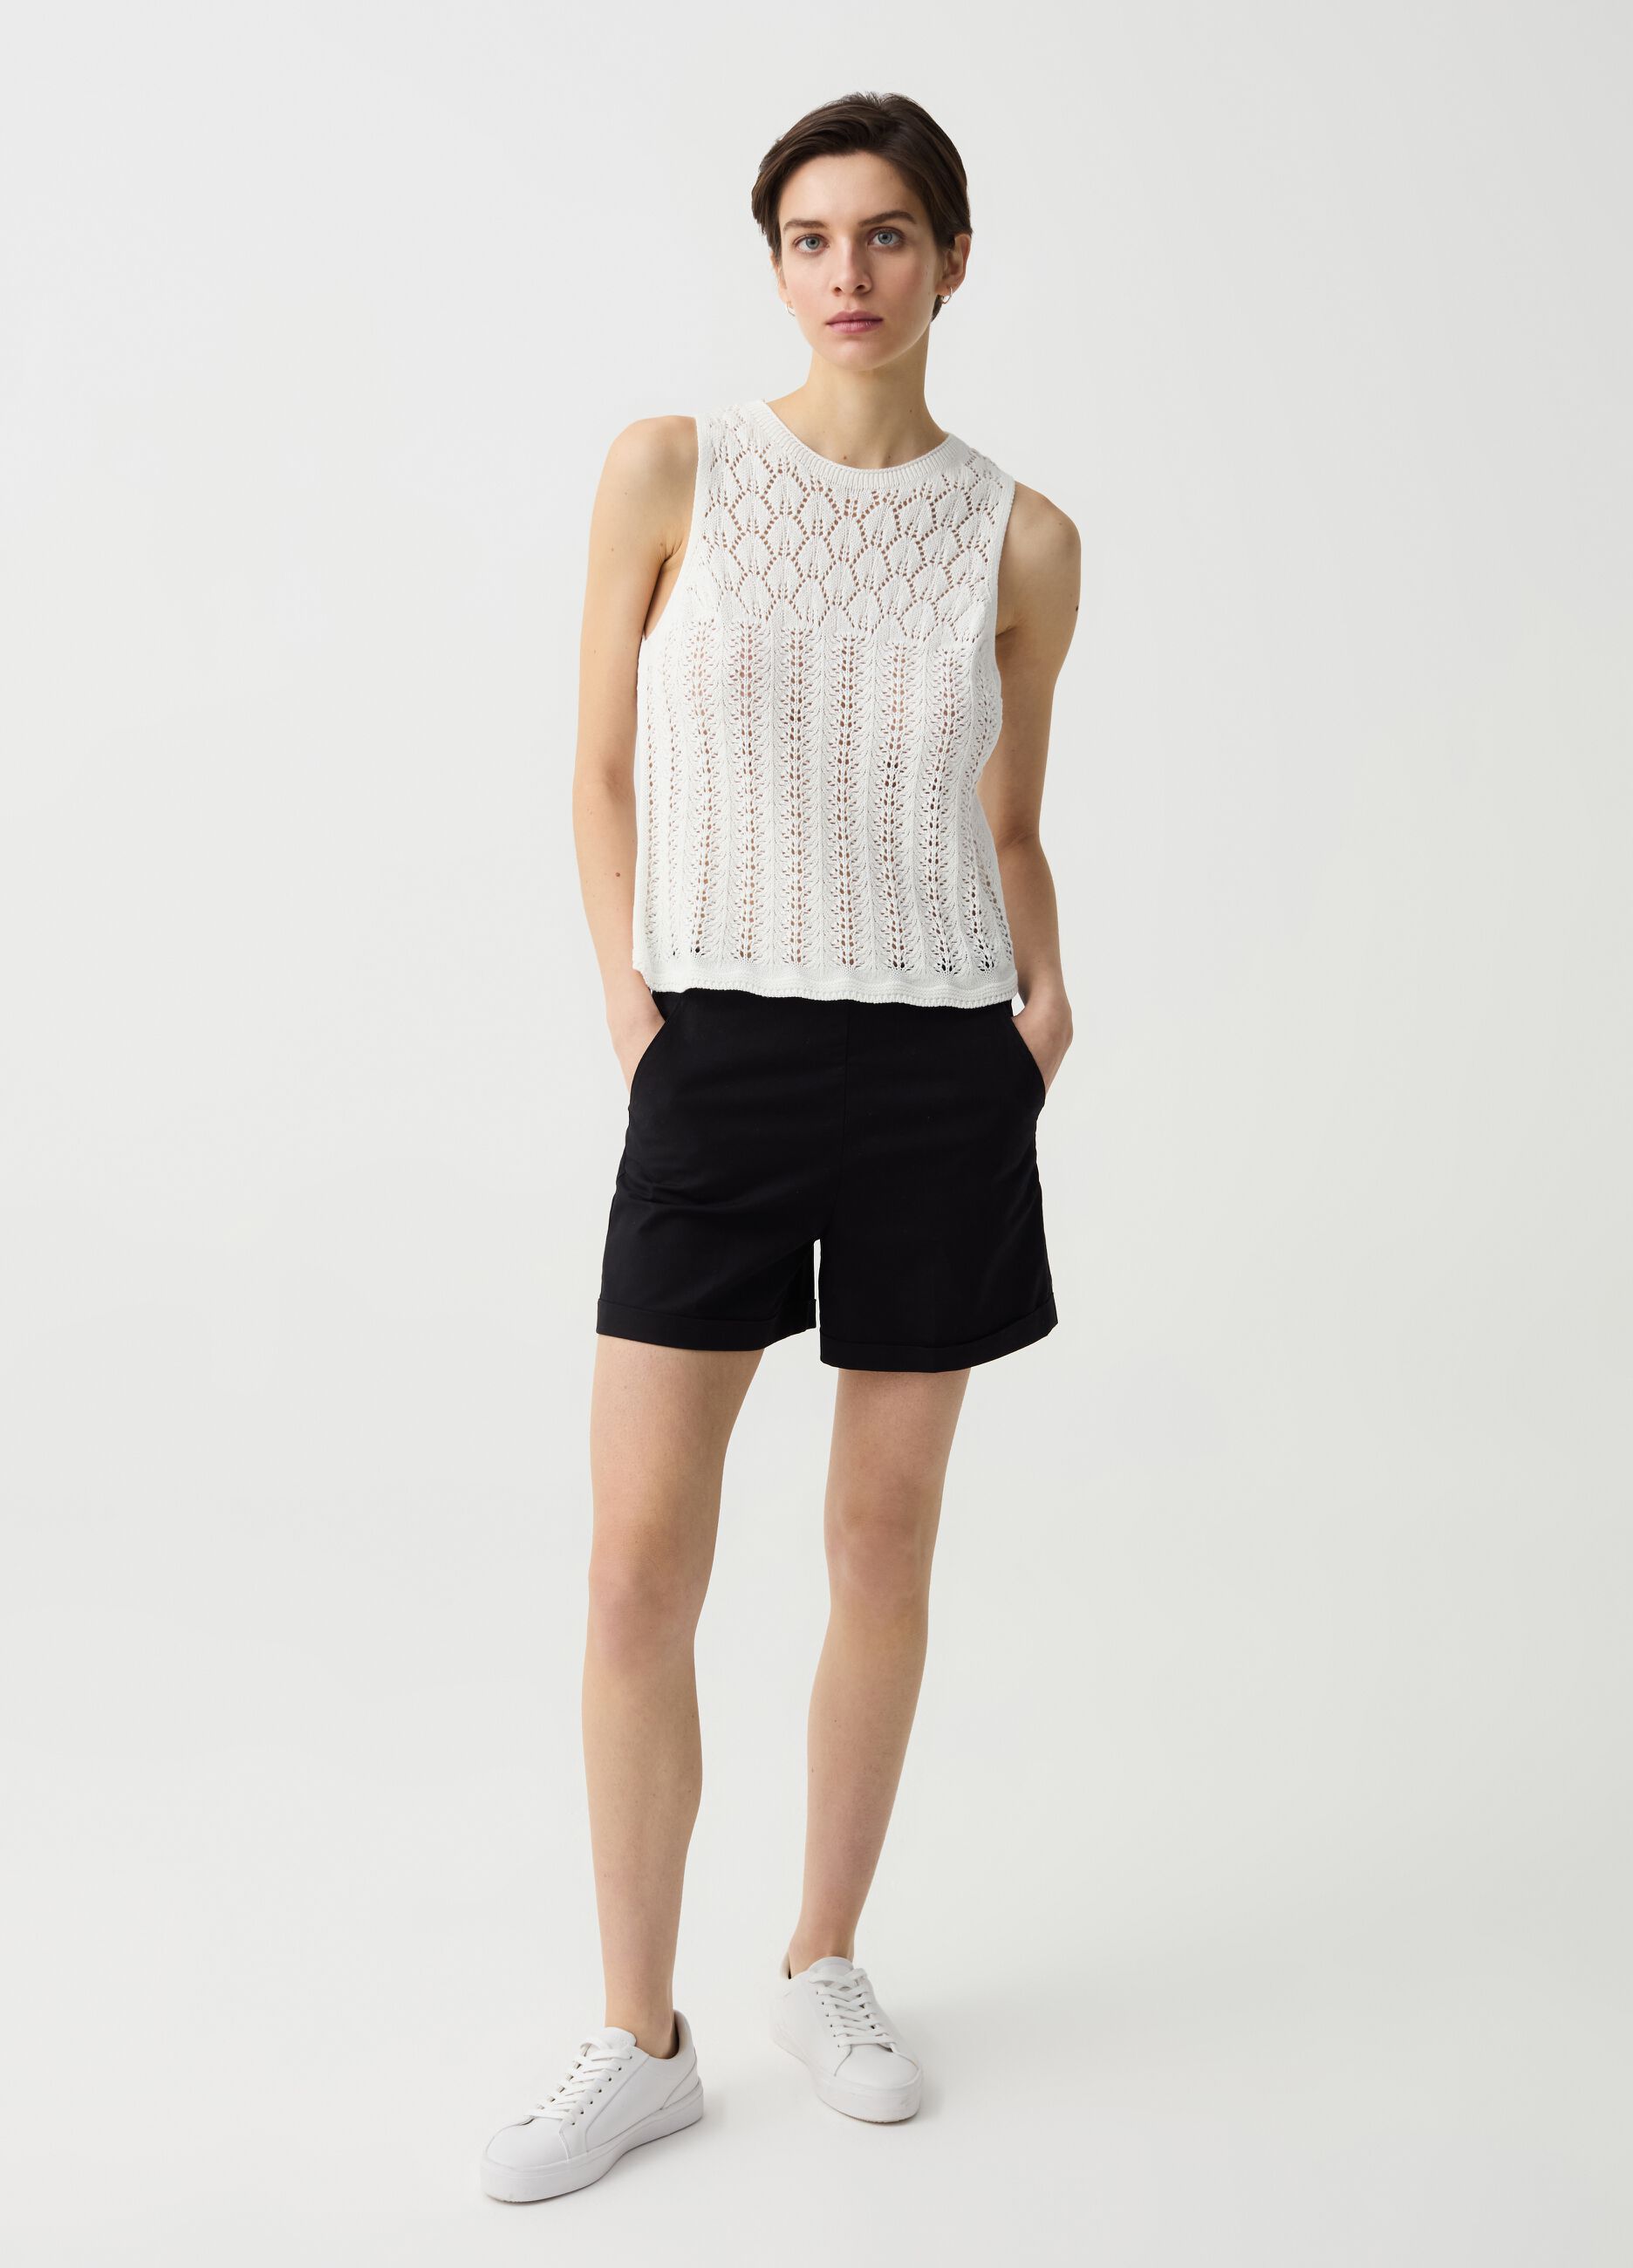 Stretch cotton shorts with turn-ups